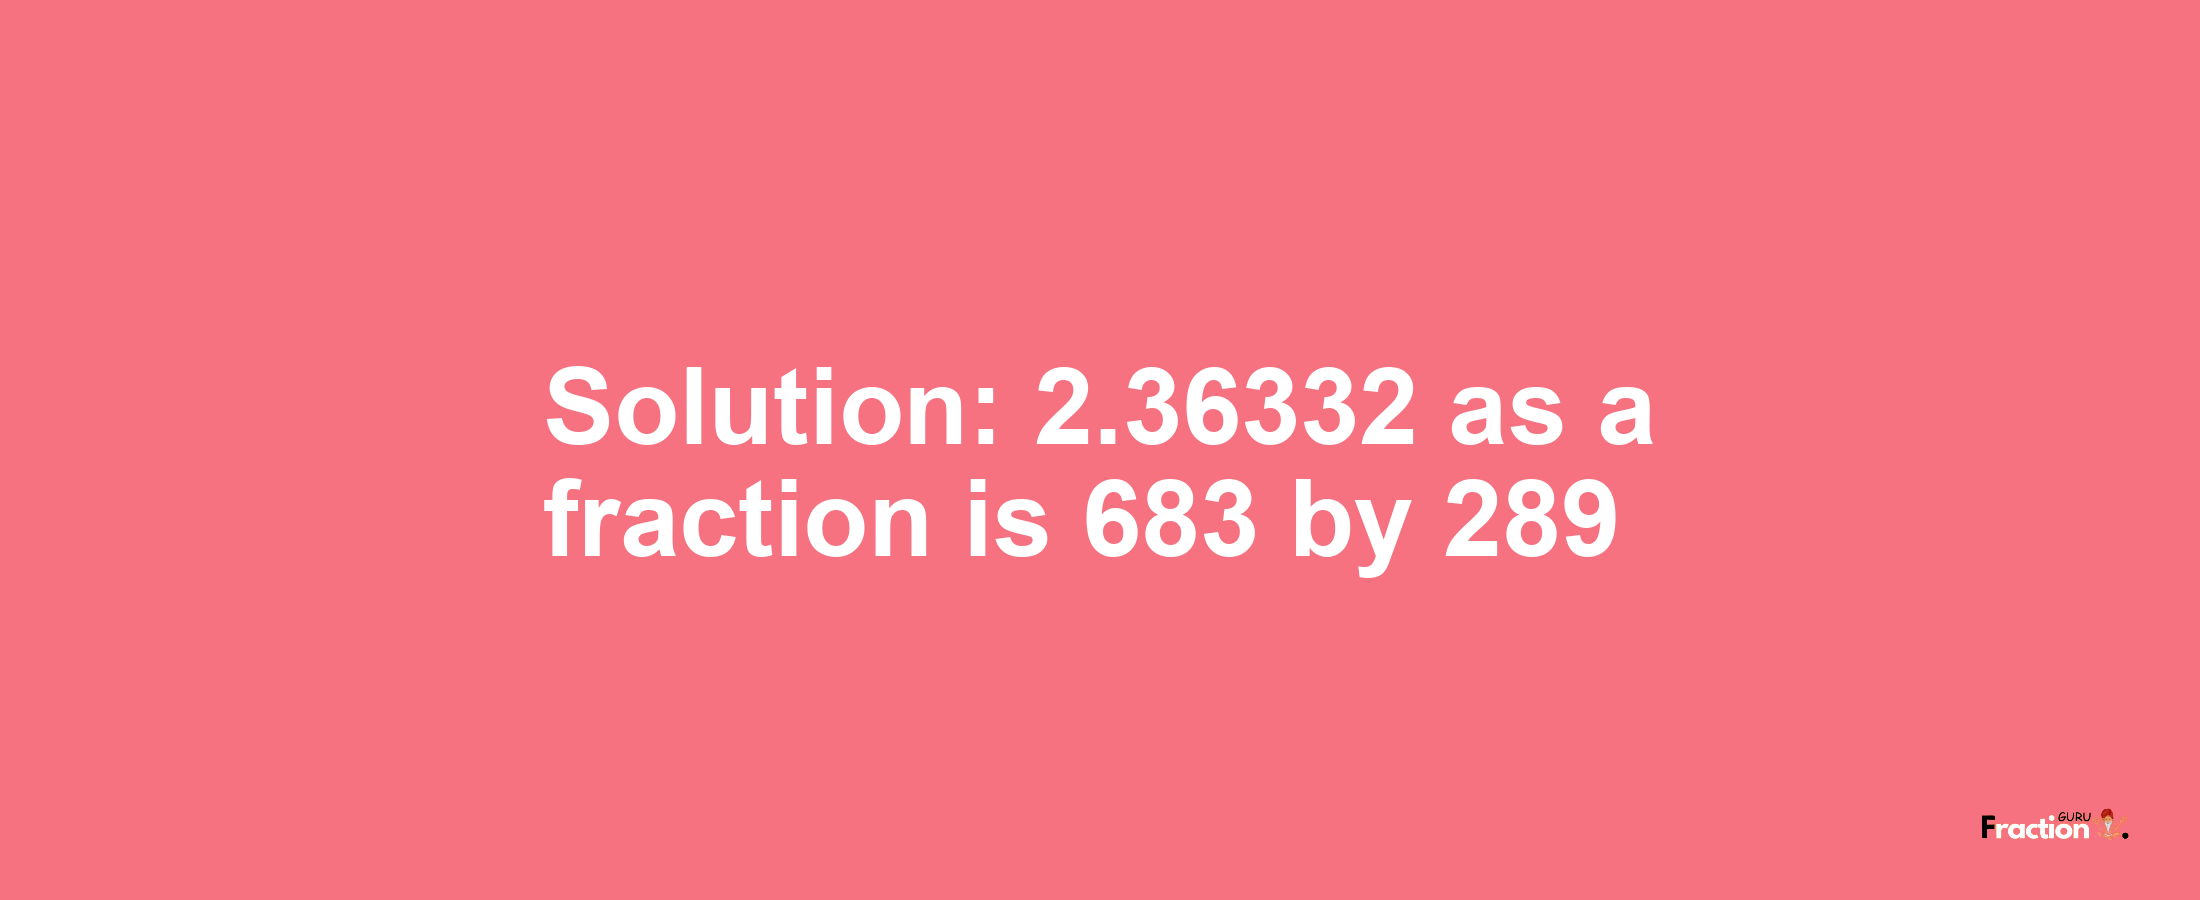 Solution:2.36332 as a fraction is 683/289